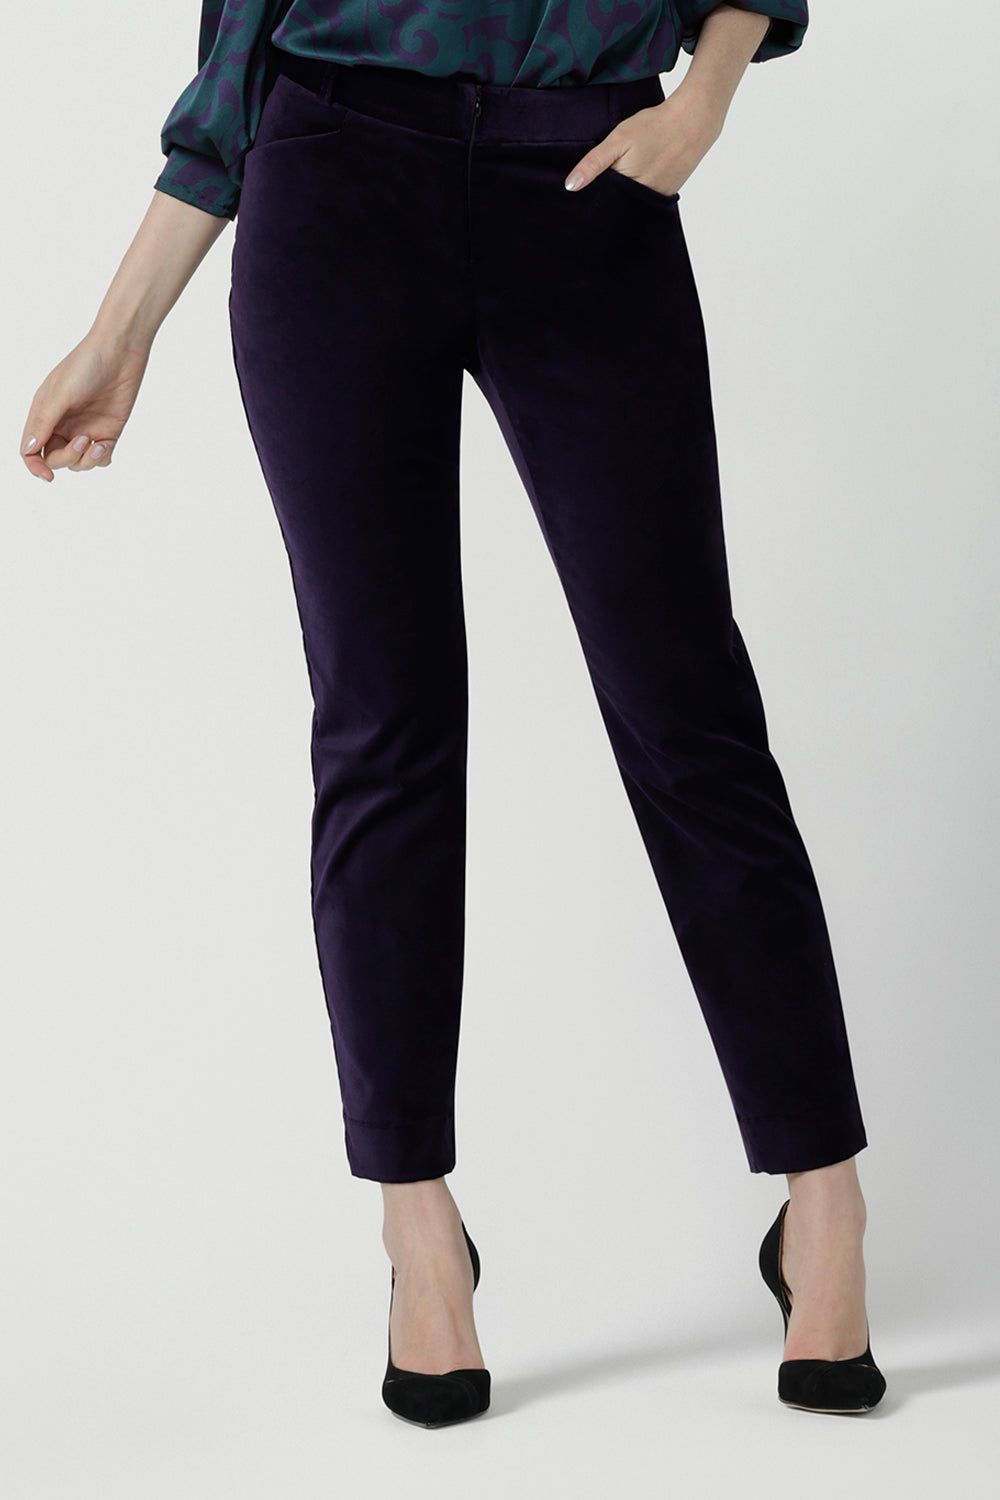 Close up of a Keaton Pant in Purple Velveteen is a slim fit pant with purple velveteen. Made in Australia for women. Cocktail pant suit set. Made in Australia for women size 8 - 24.